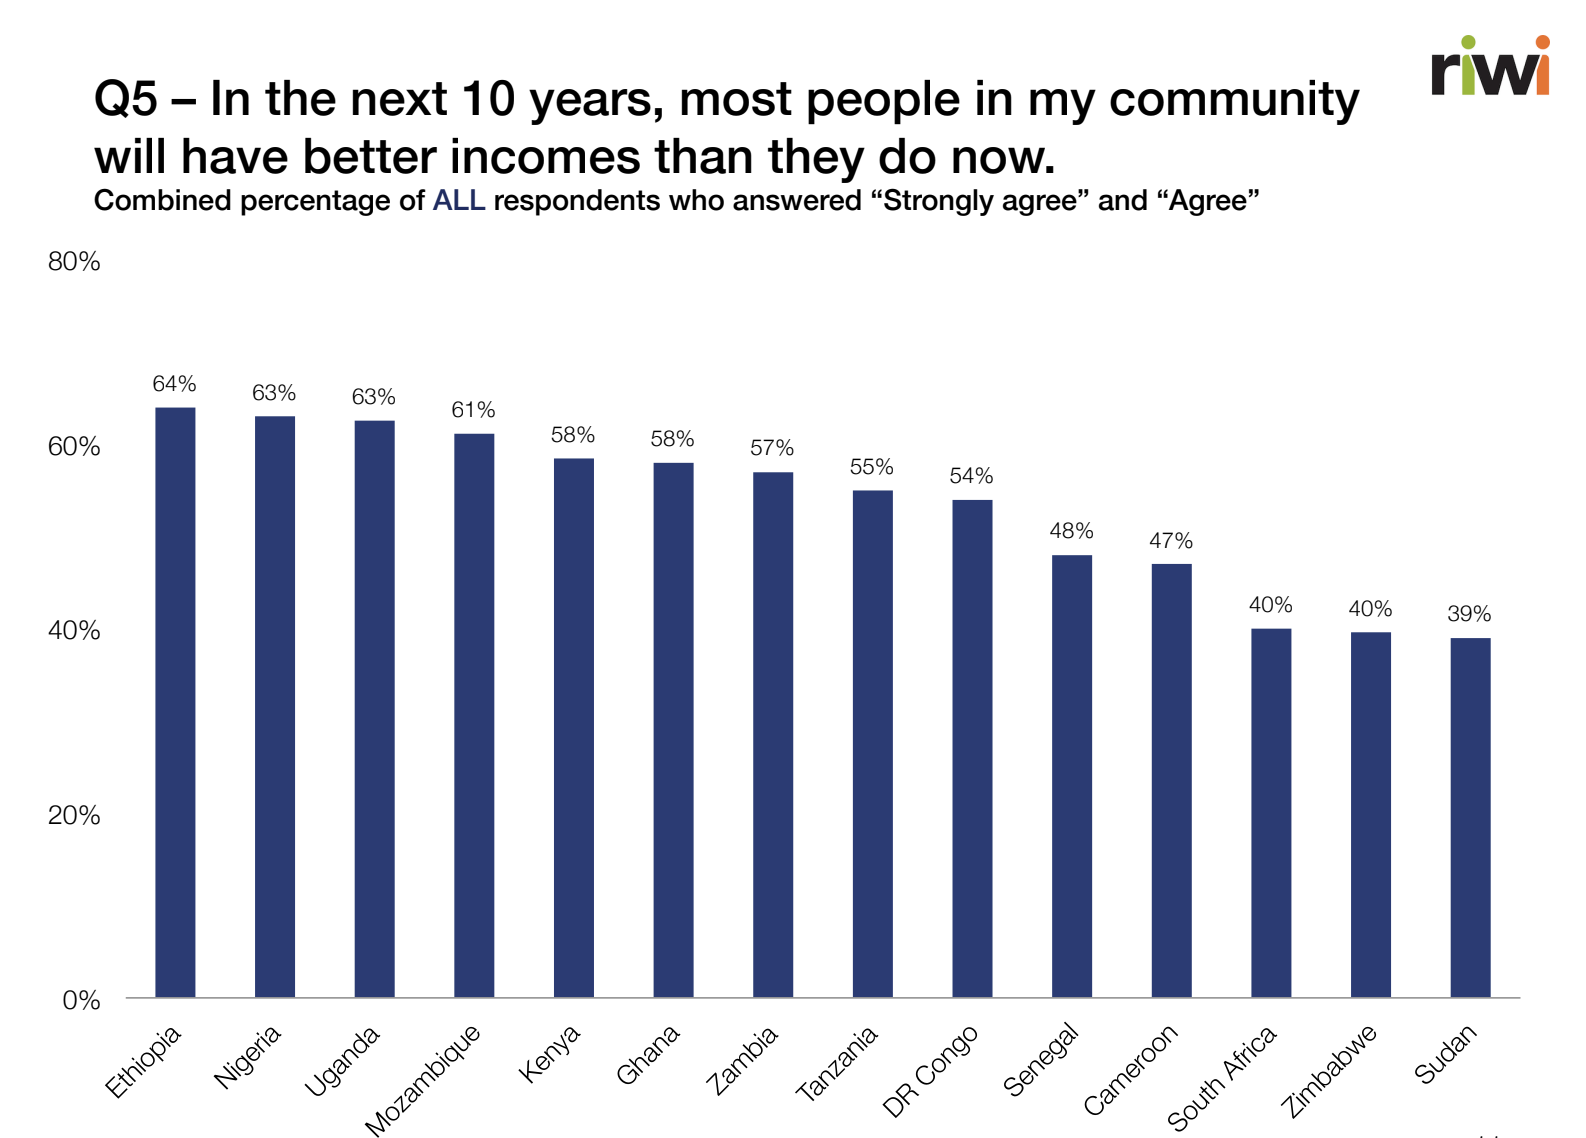 chart graphing the perceptions of future income of community members